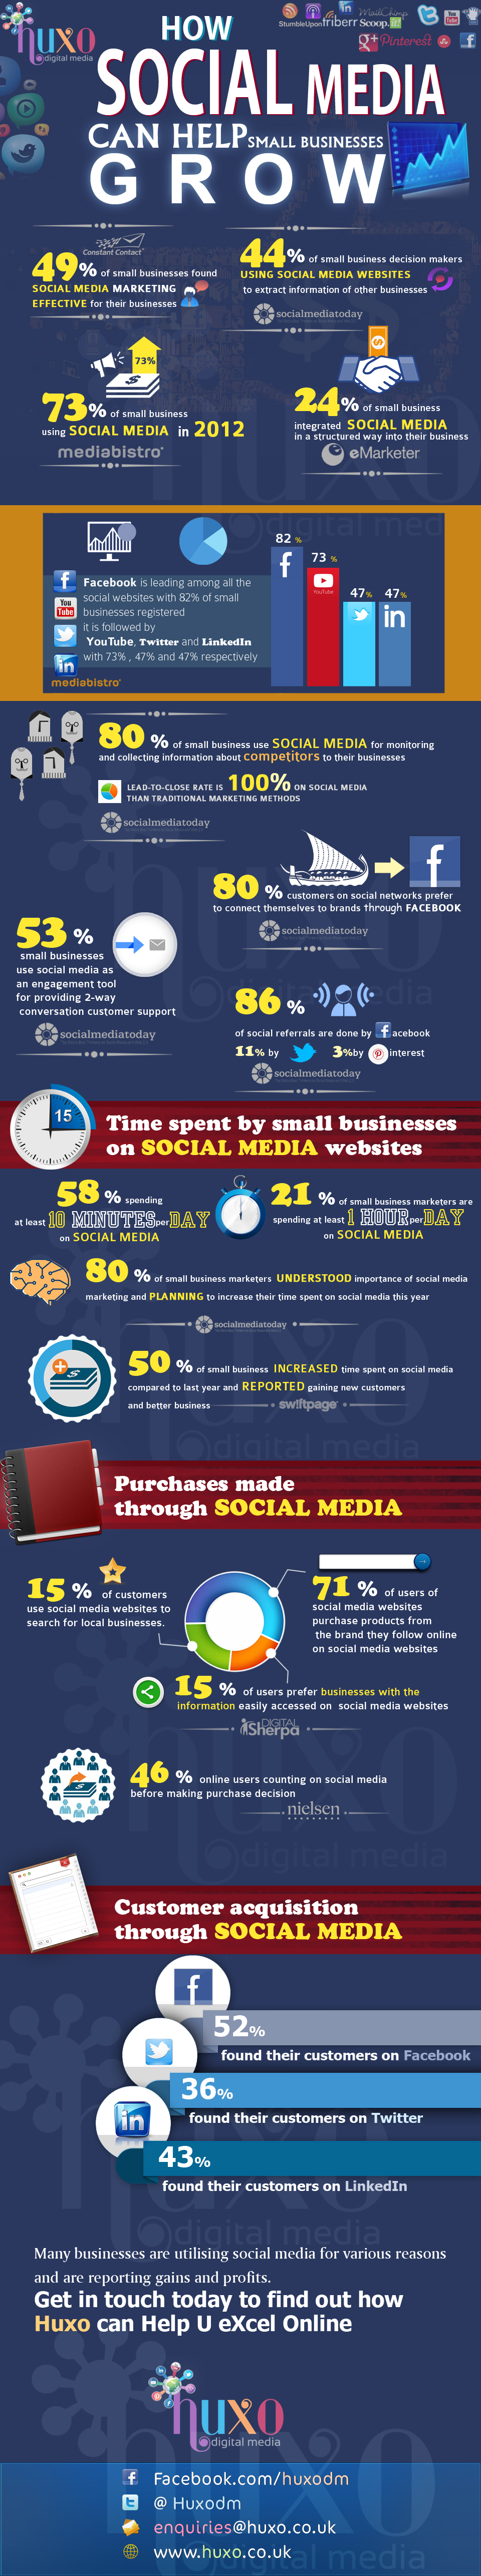 how-social-media-can-help-small-businesses-grow-infographic